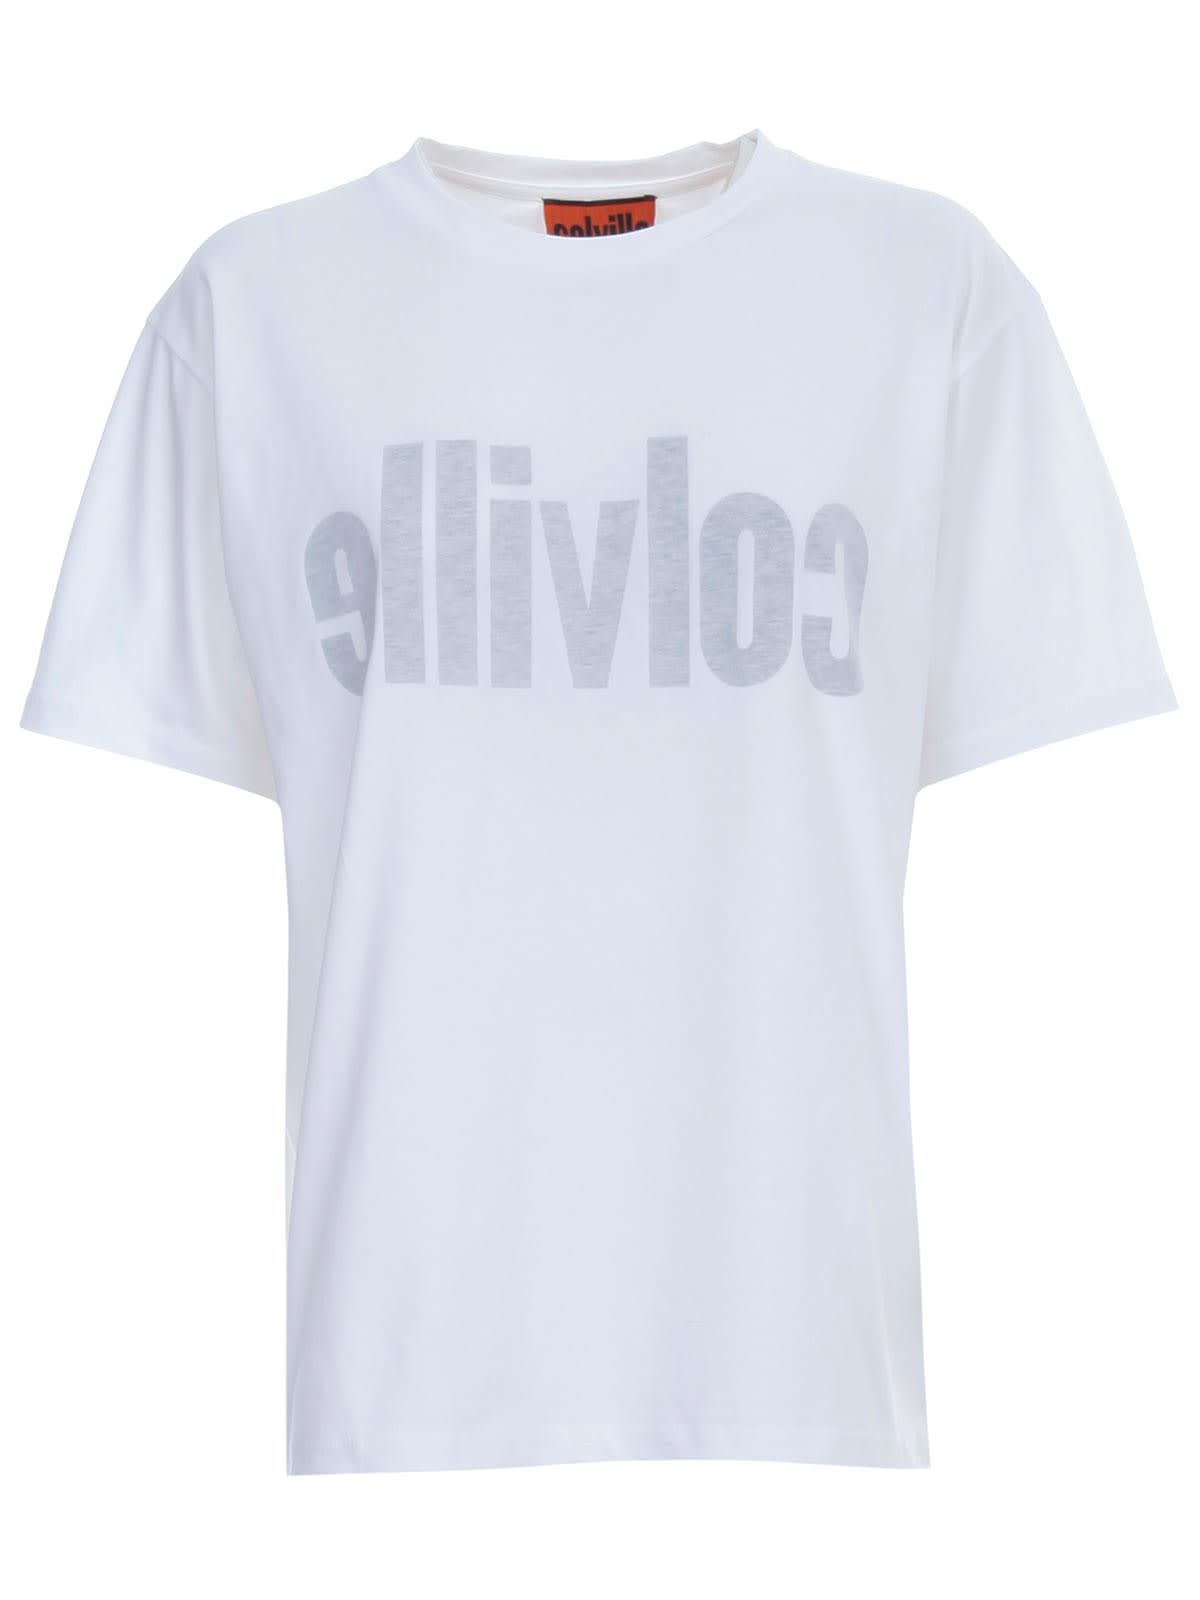 COLVILLE T-SHIRT S/S CREW NECK INSIDE OUT,11236177